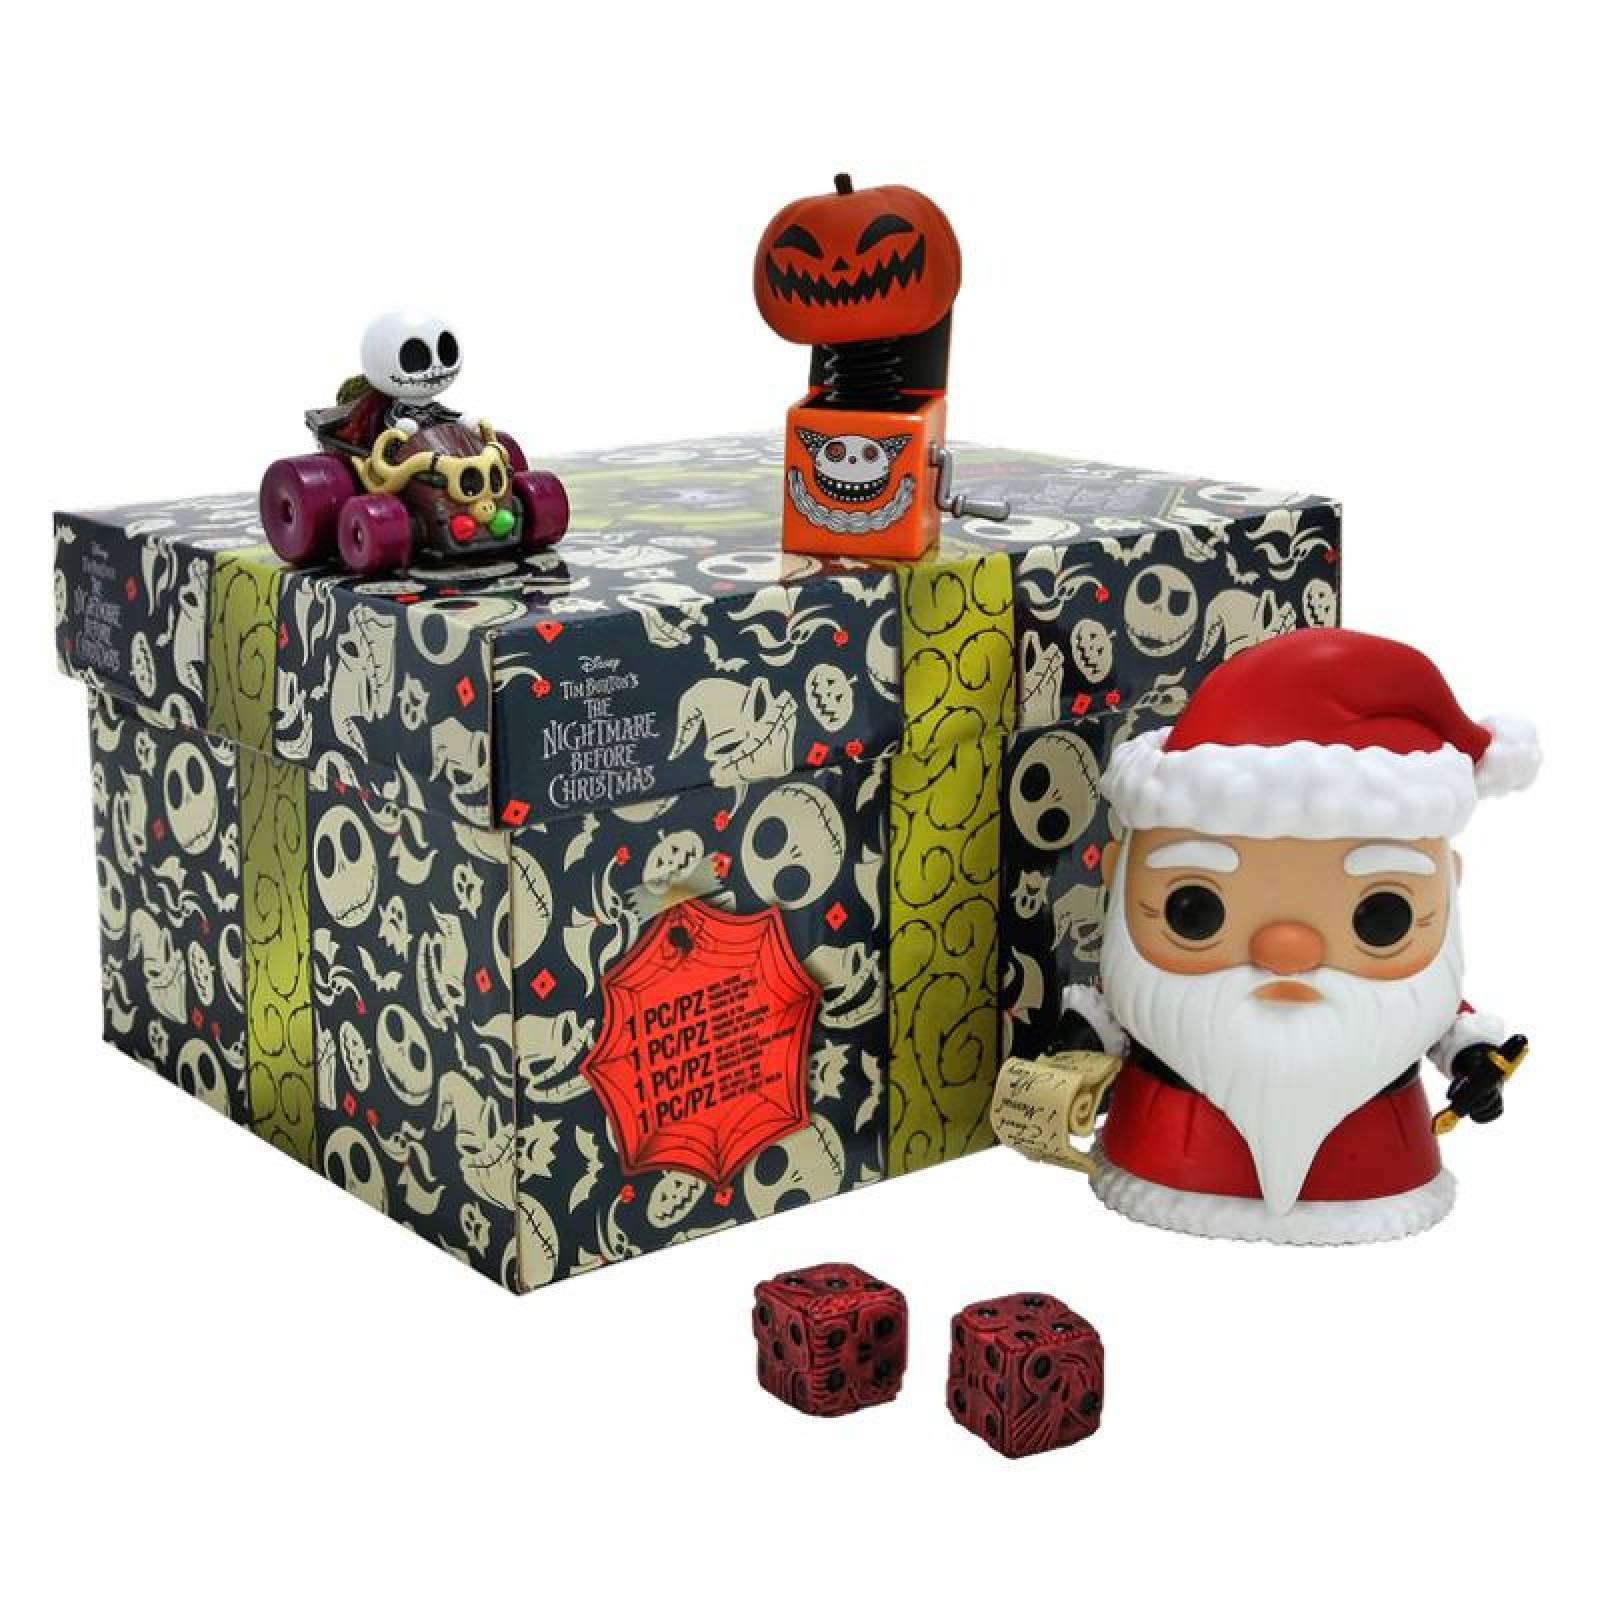 Collector Box Nigthmare Before Christmas Exclusivo 